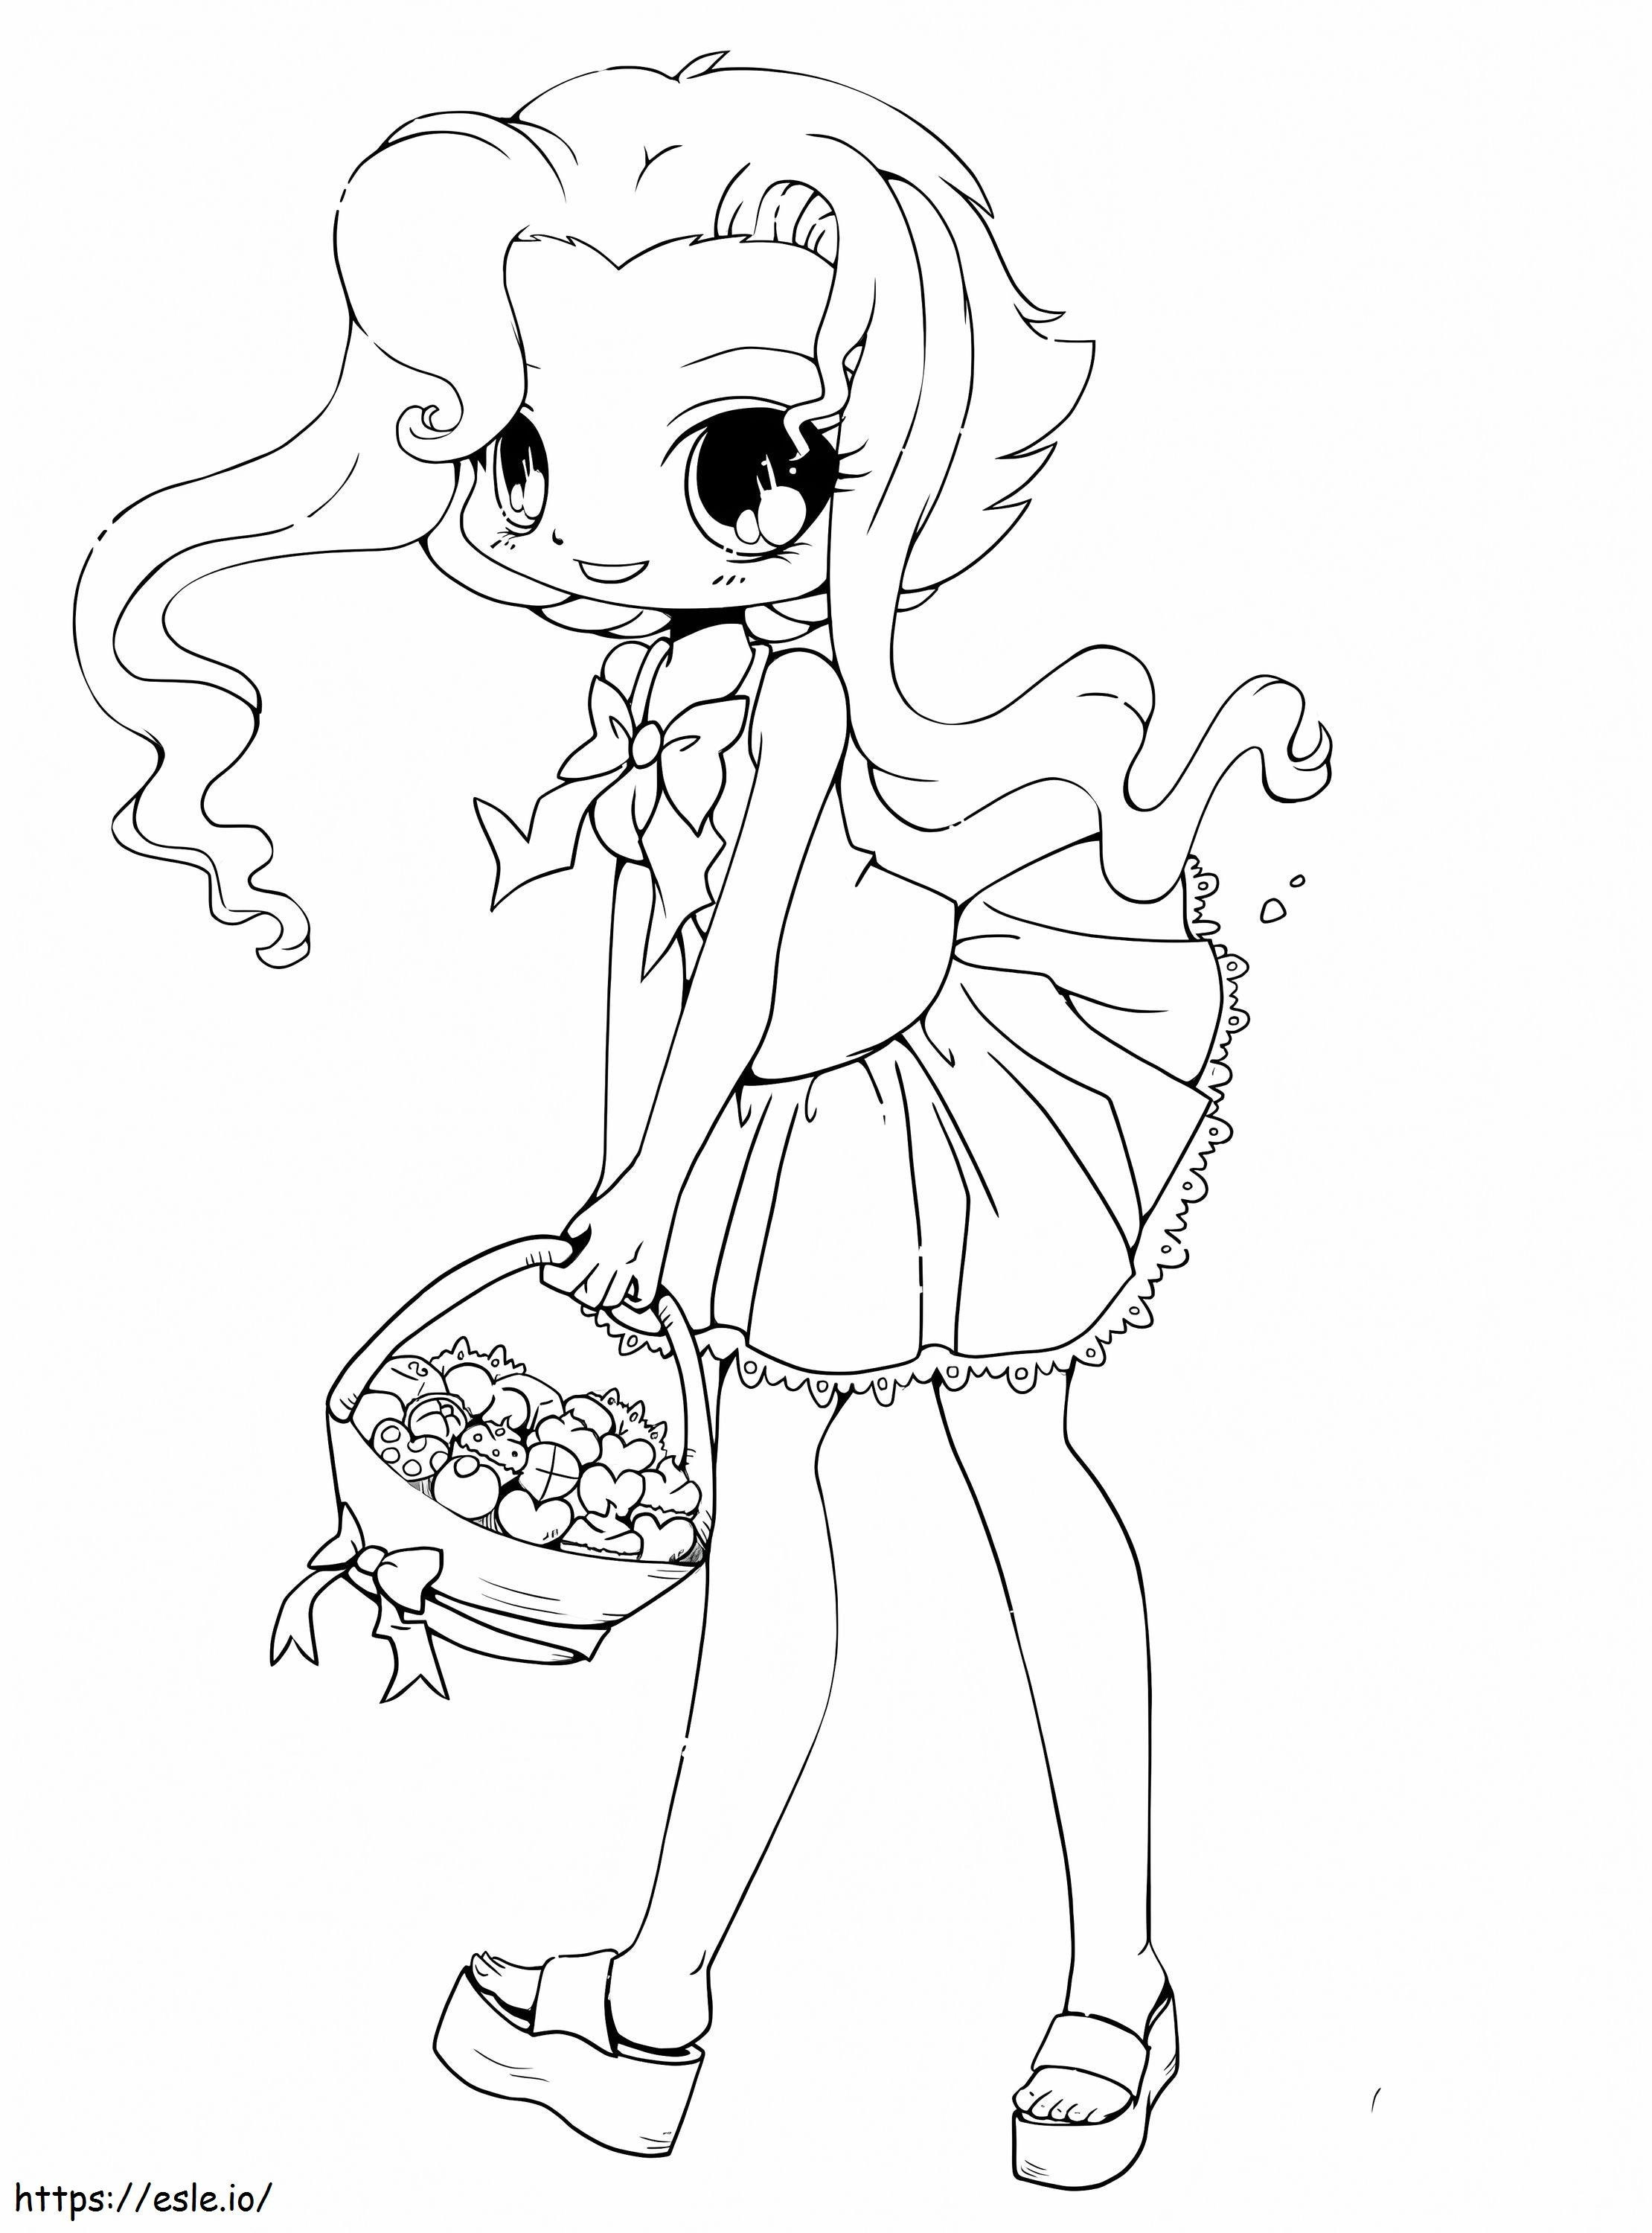 Girl Holding A Basket Of Fruits Kawaii coloring page